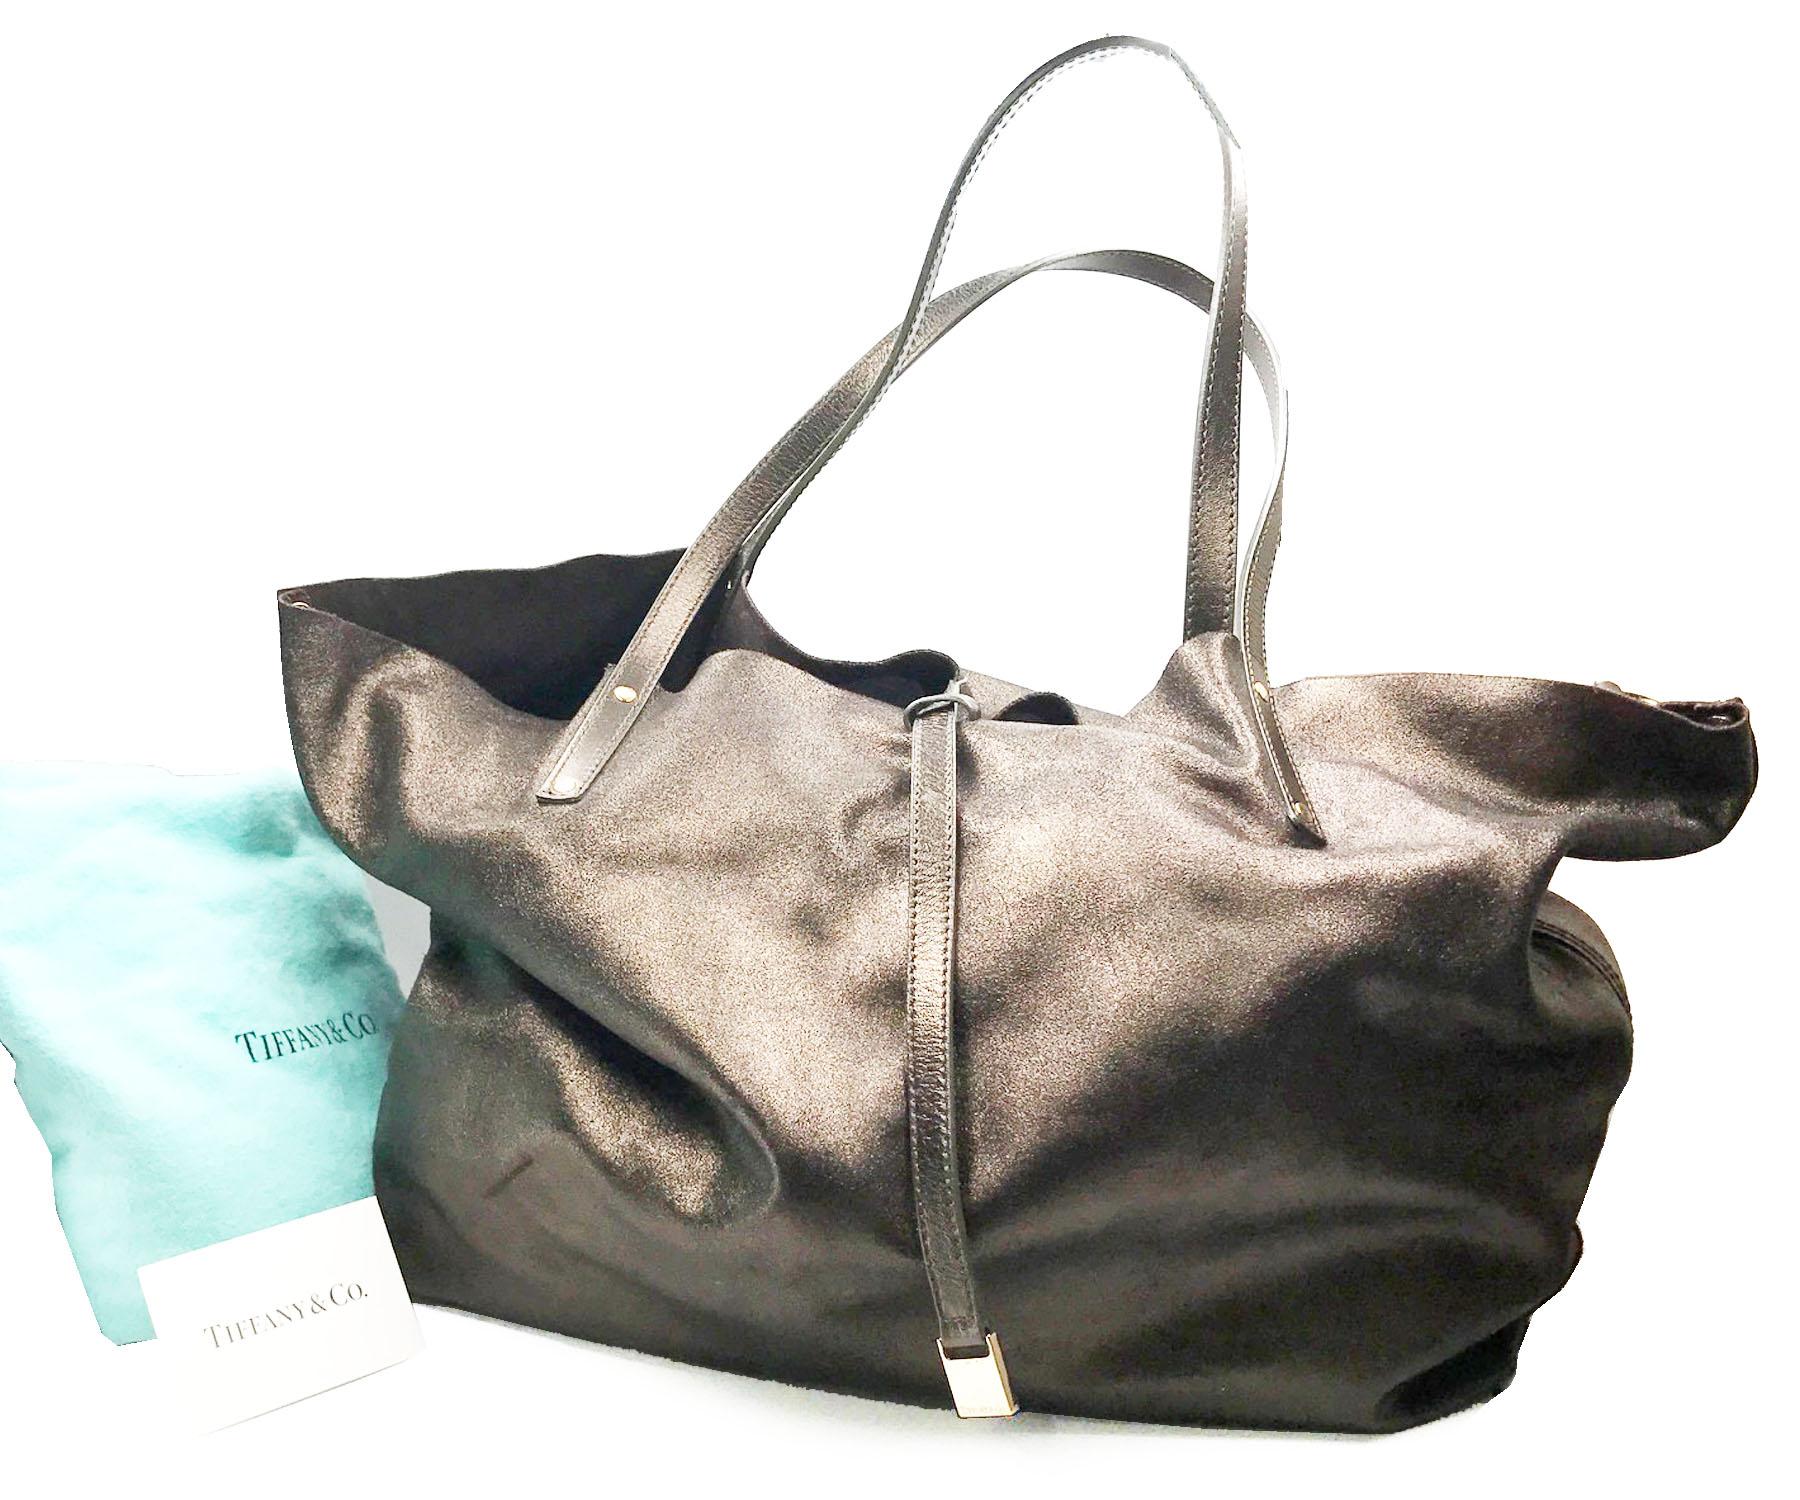 Tiffany & Co 2 Way Bronze Brown Suede Large Soft Tote Shoulder Bag

*Made in Italy
*Comes with original dustbag and detachable pouch

-Approximately 12.5 x 9.5 x 6.5 inches
-Pouch- approximately 8.75″ x 5″
-Wear either way- the bronze side or the